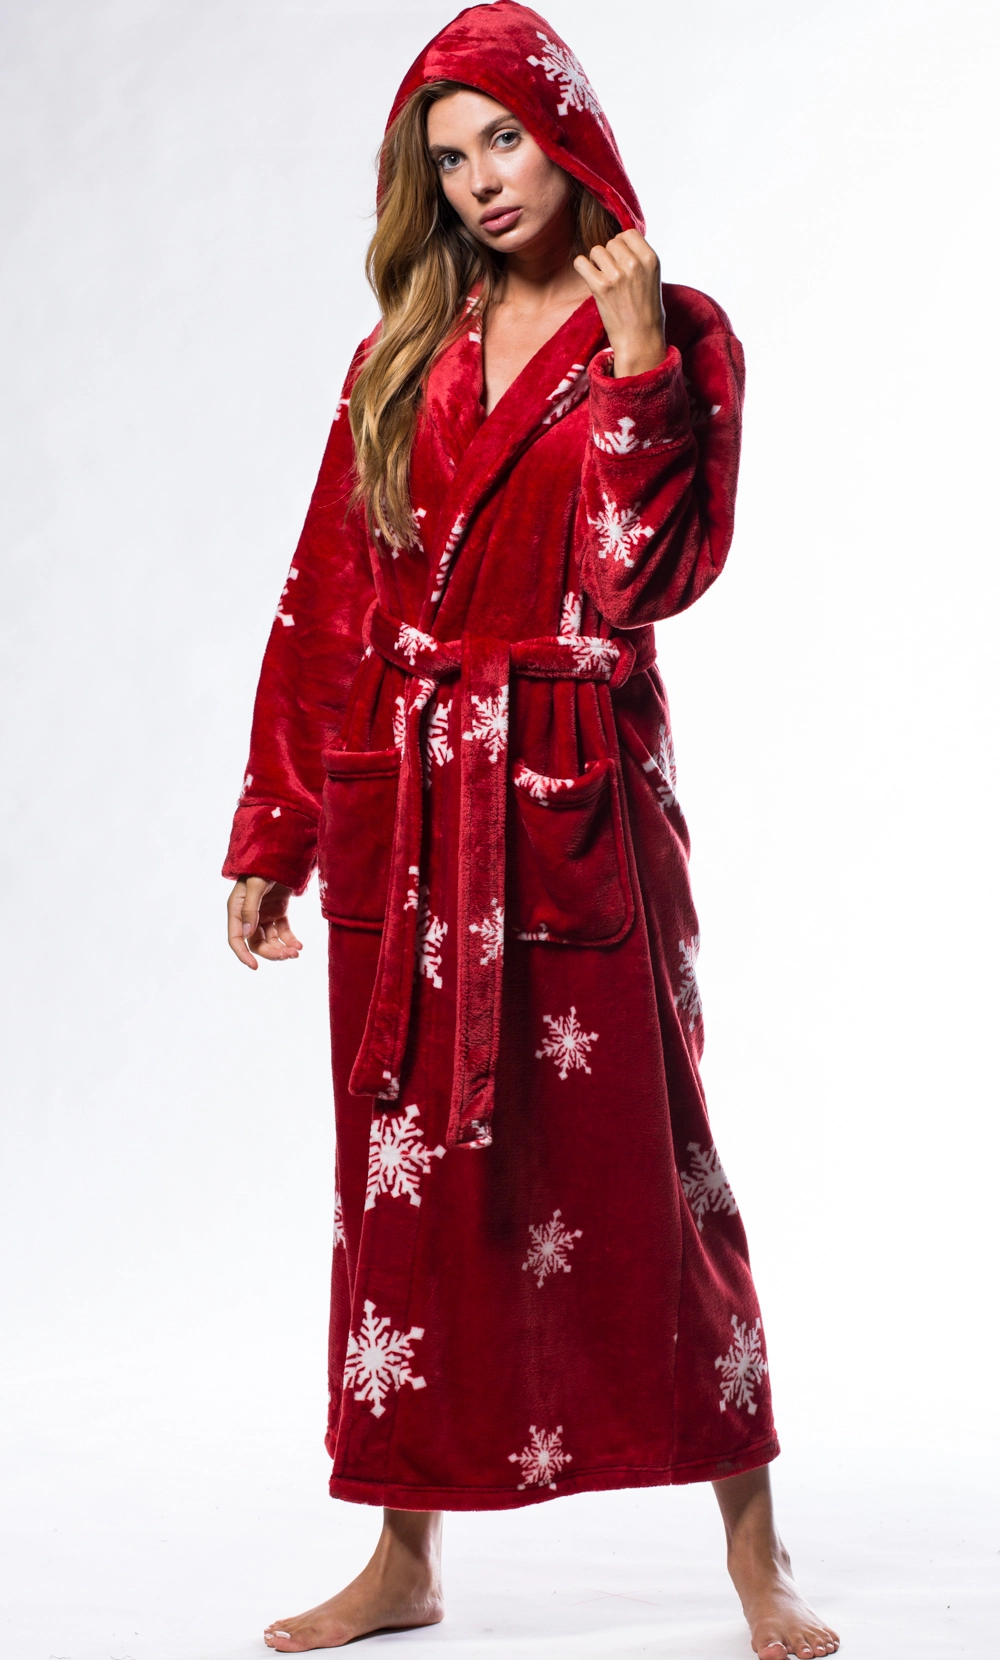 Soft Plush Fleece Women's Robe for Mothers, Wives, Daughters, and